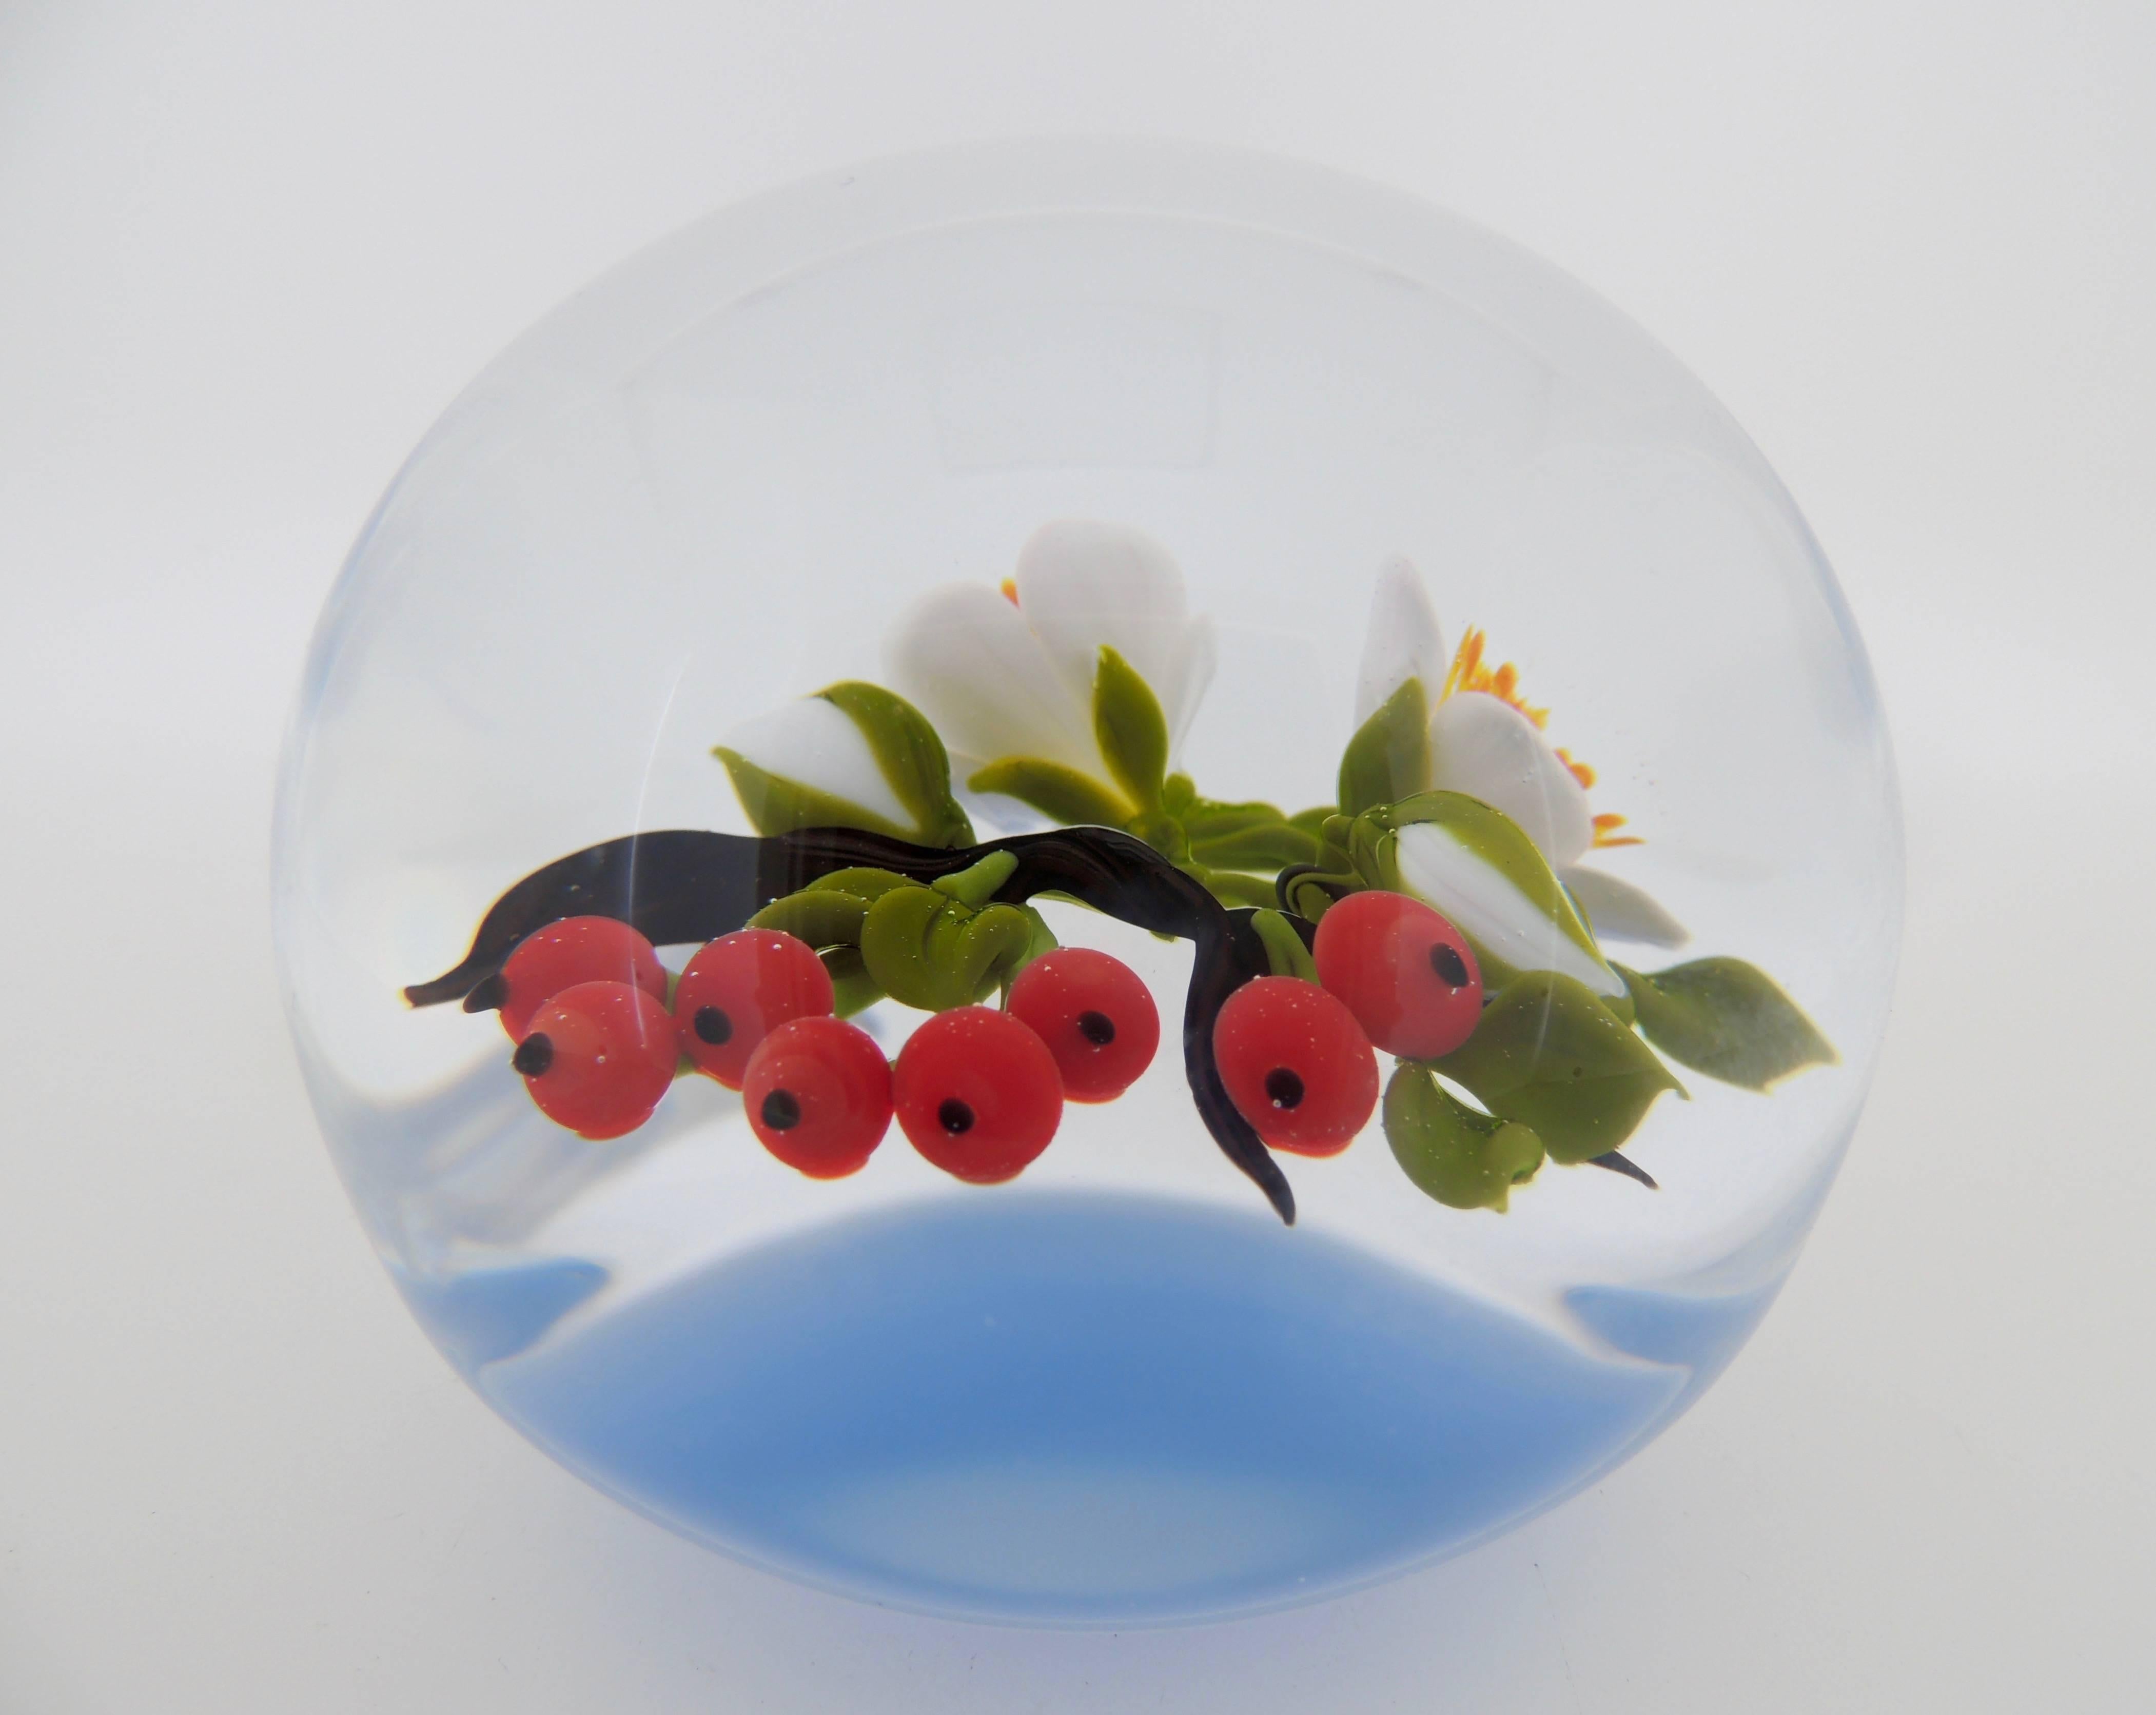 A fine example of one Victor Trabucco's large scale paperweights. The lampwork includes a branch with red berries and flower blossoms suspended above a milky-blue colored ground. 

There is a 